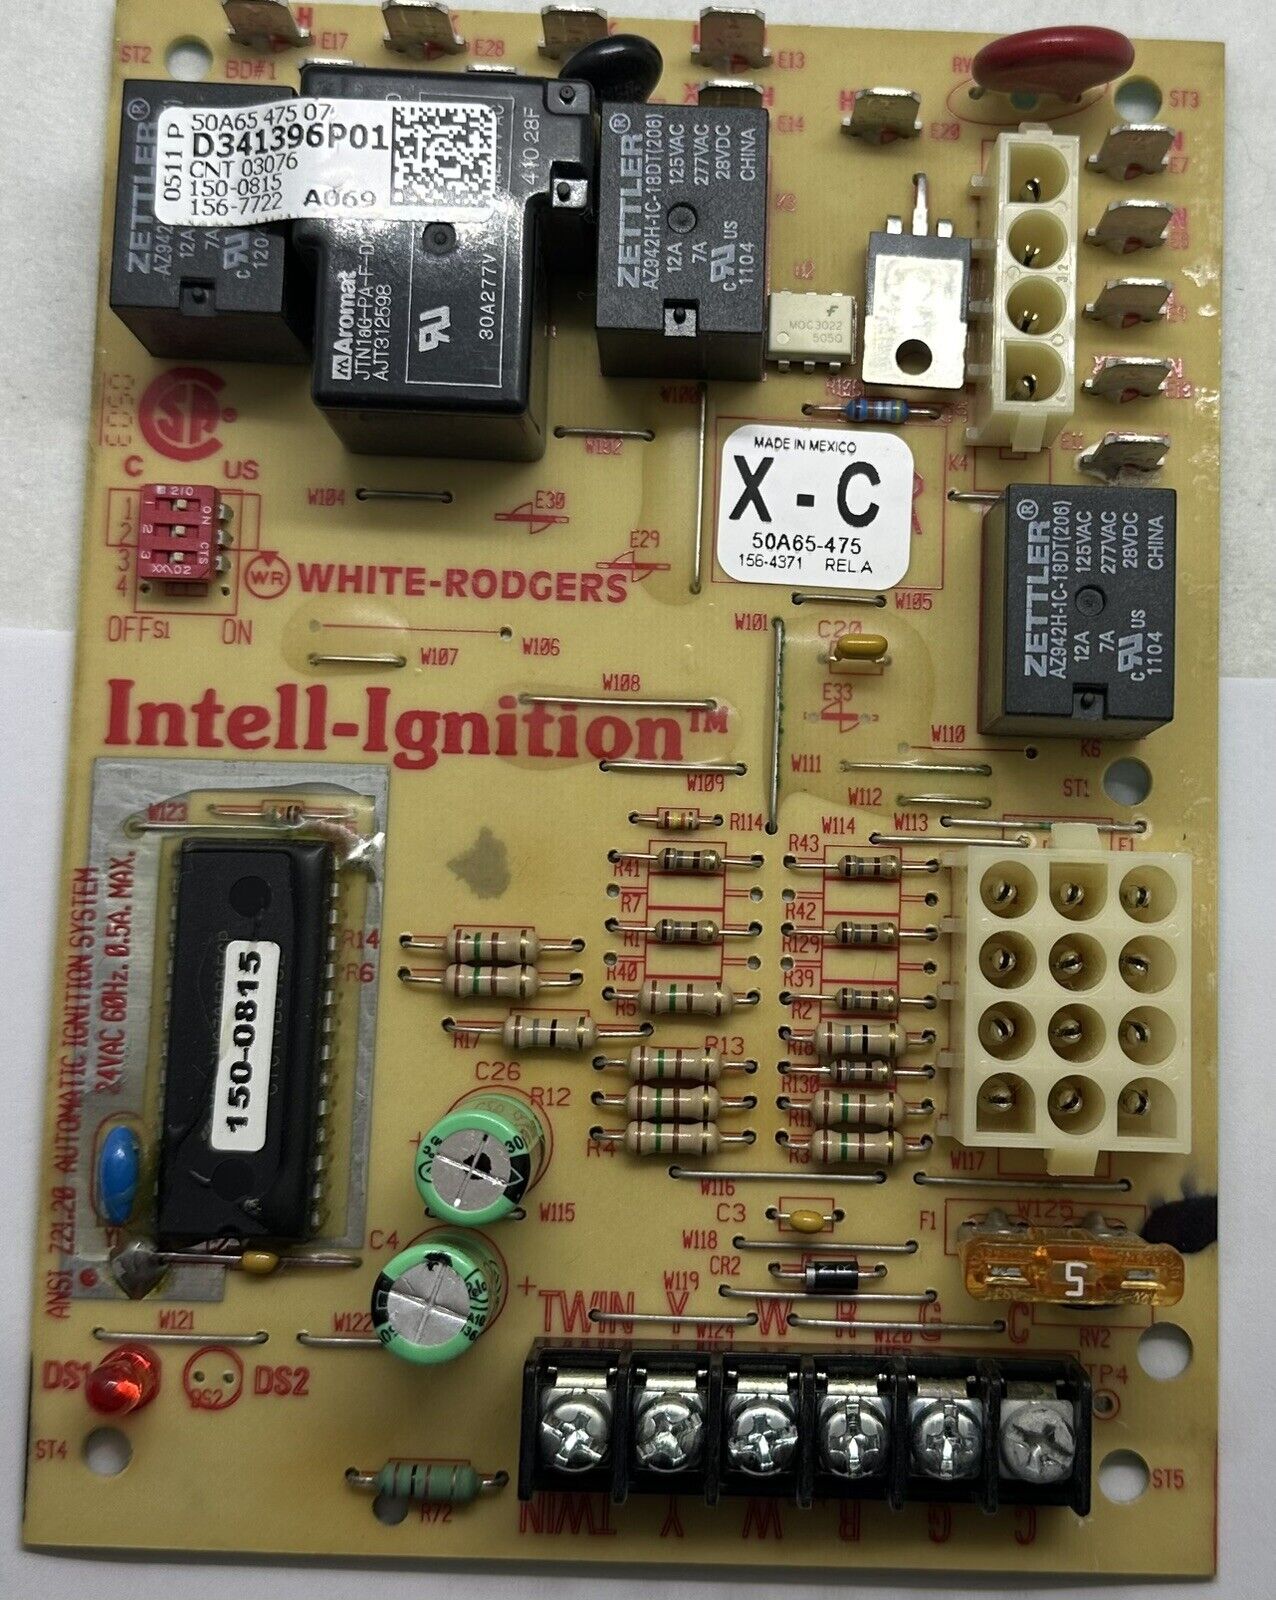 White-Rodgers 50A65-475-07  D341396P01  Furnace Control Circuit Board